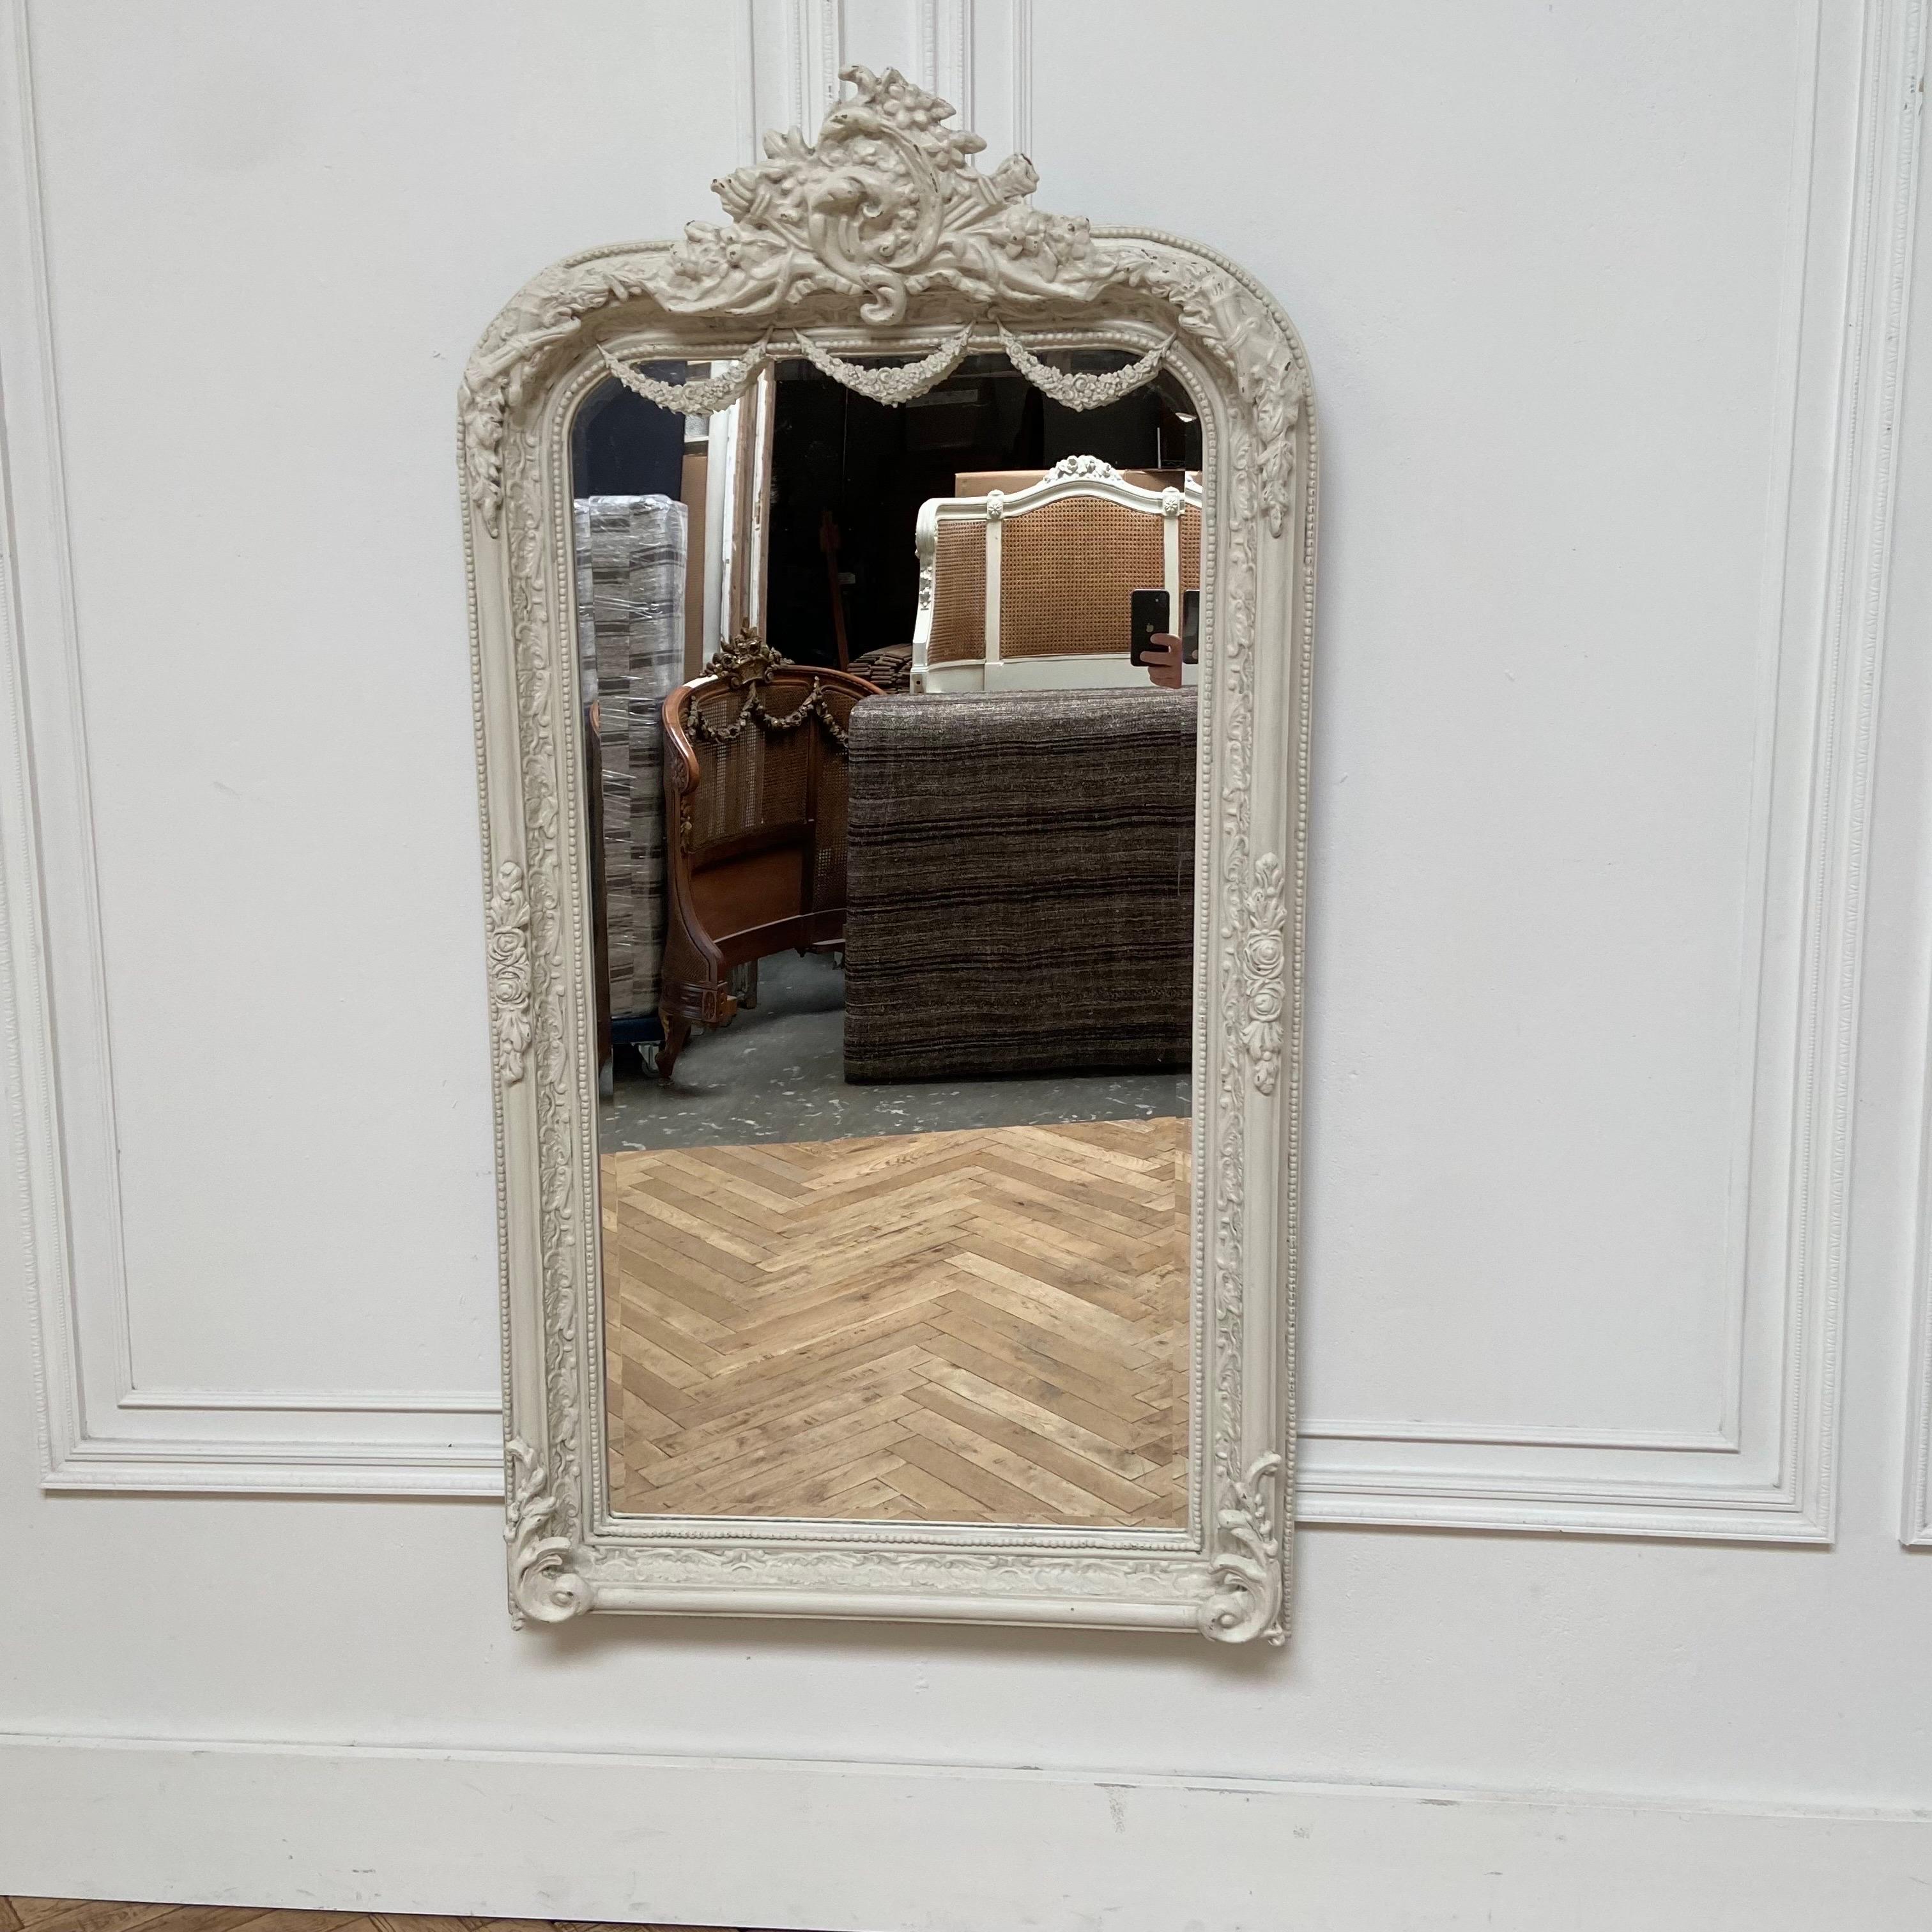 Beautiful reproduction of an antique French style.
Large cartouche with rose swags.
mirror 34”W x 61”H x 3”D
Made from wood and resin materials. Painted in a soft oyster white with subtle distressed edges and antique patina.